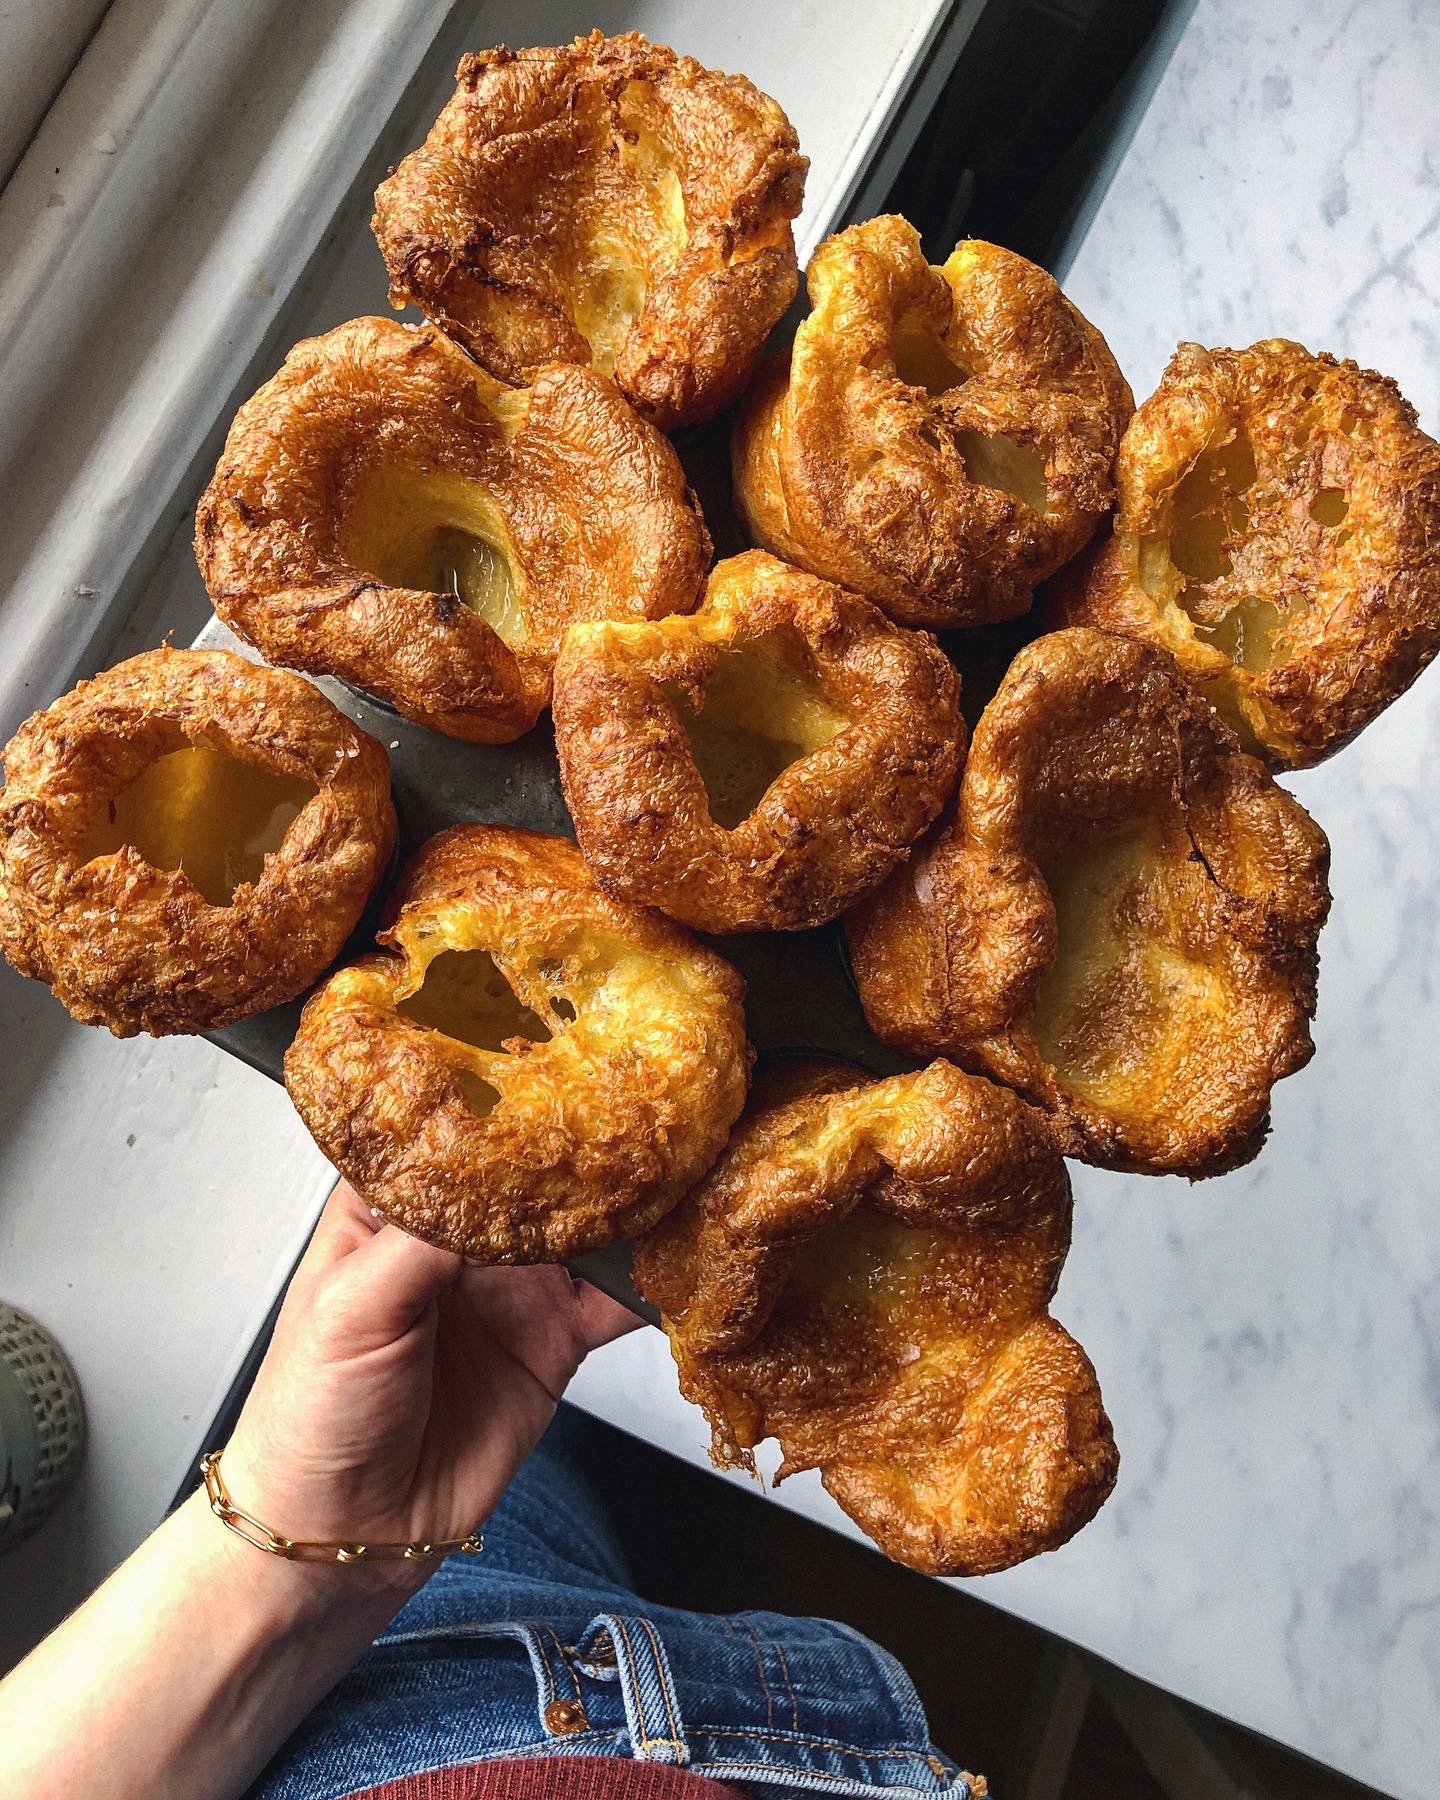 Low FODMAP and gluten free beer batter yorkshire pudding recipe